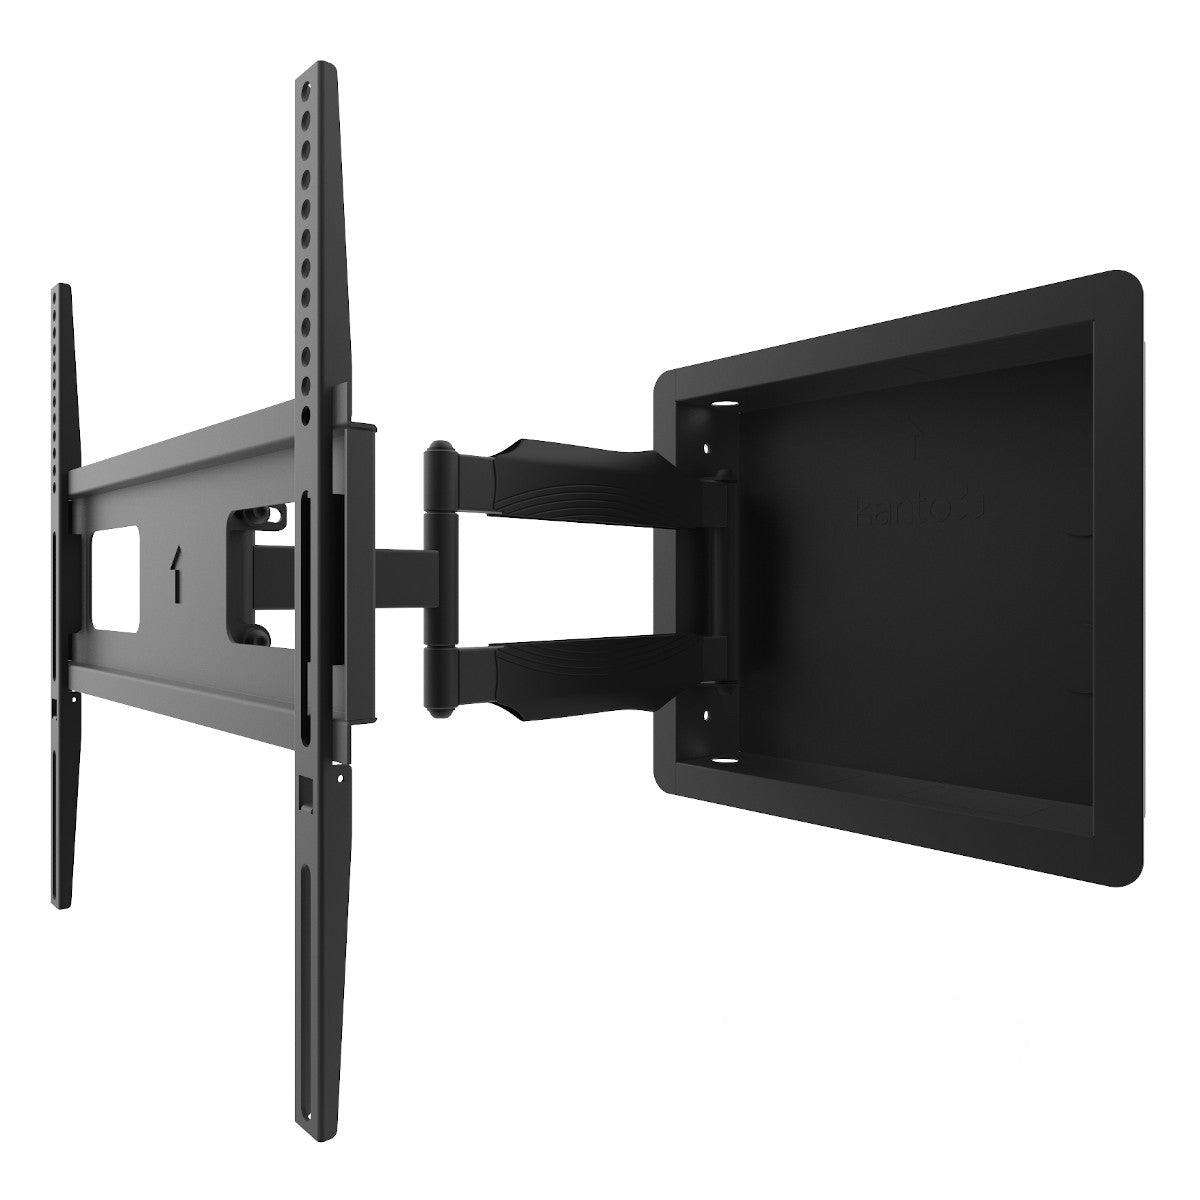 Kanto R300 Recessed In-Wall Full-Motion Mount for 32" - 55" TVs